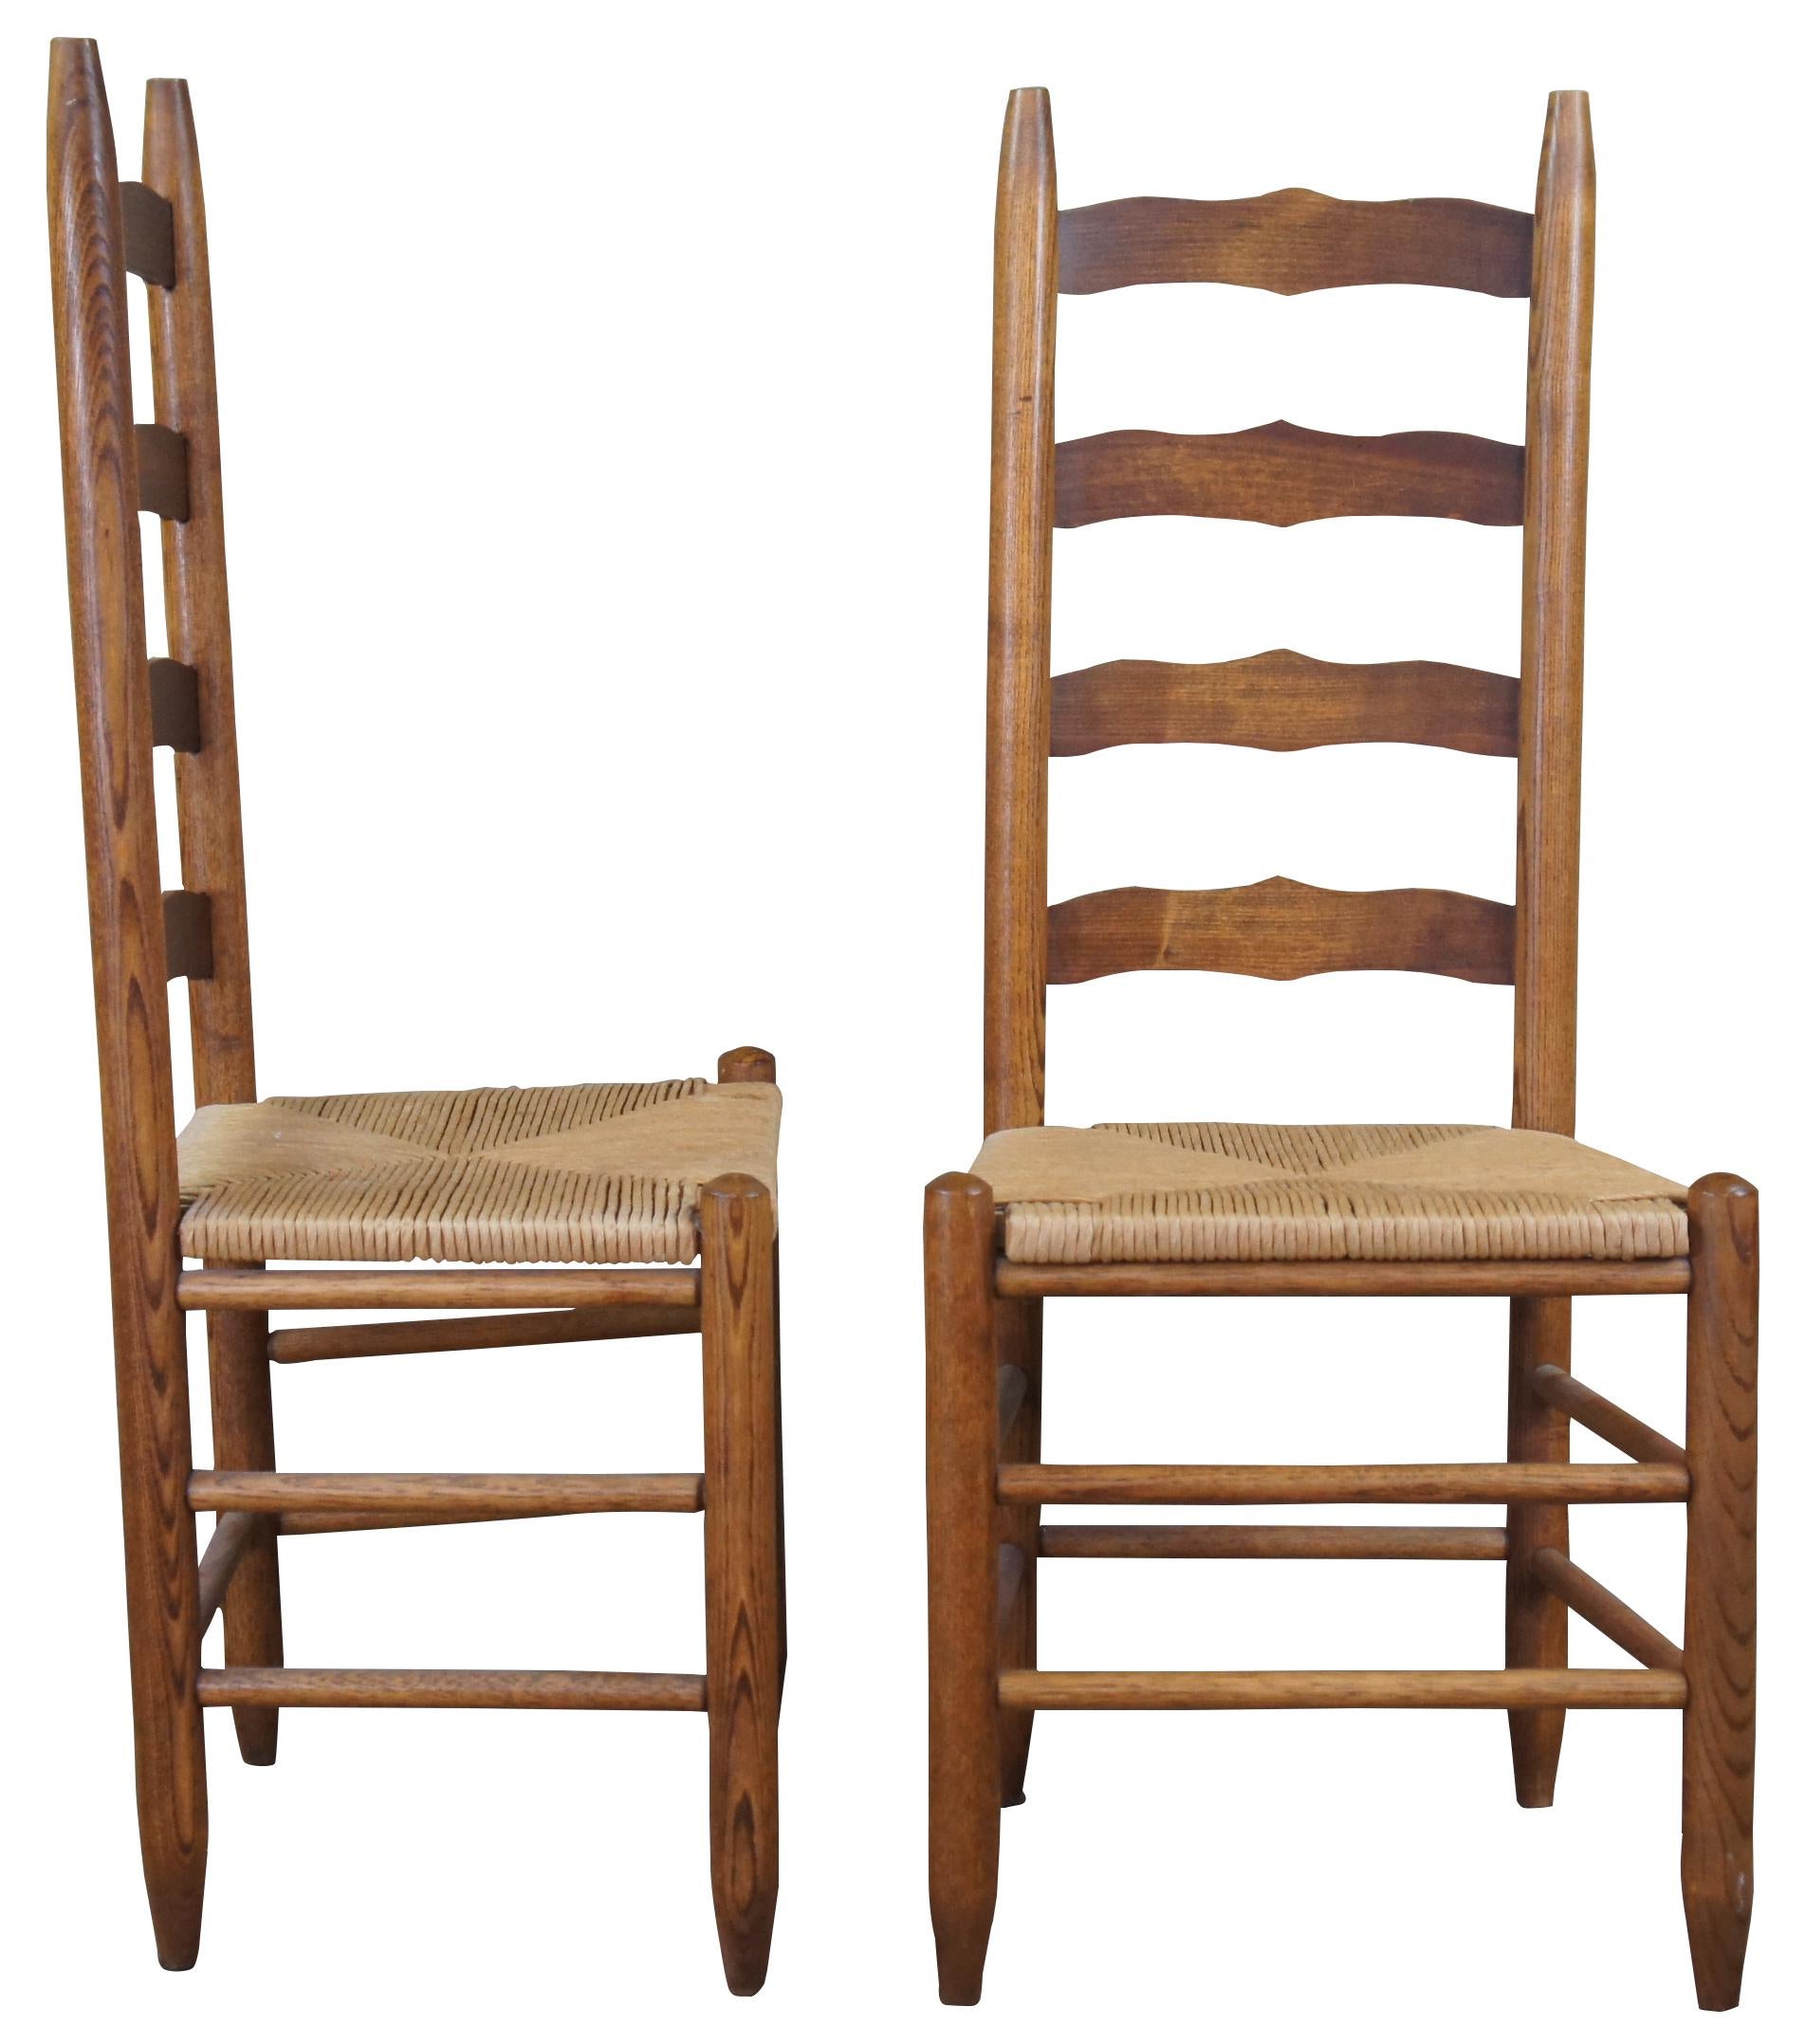 Pair of two antique ladder back side dining chairs. Made of oak featuring woven rush seats and tall ladderback with serpentine form.